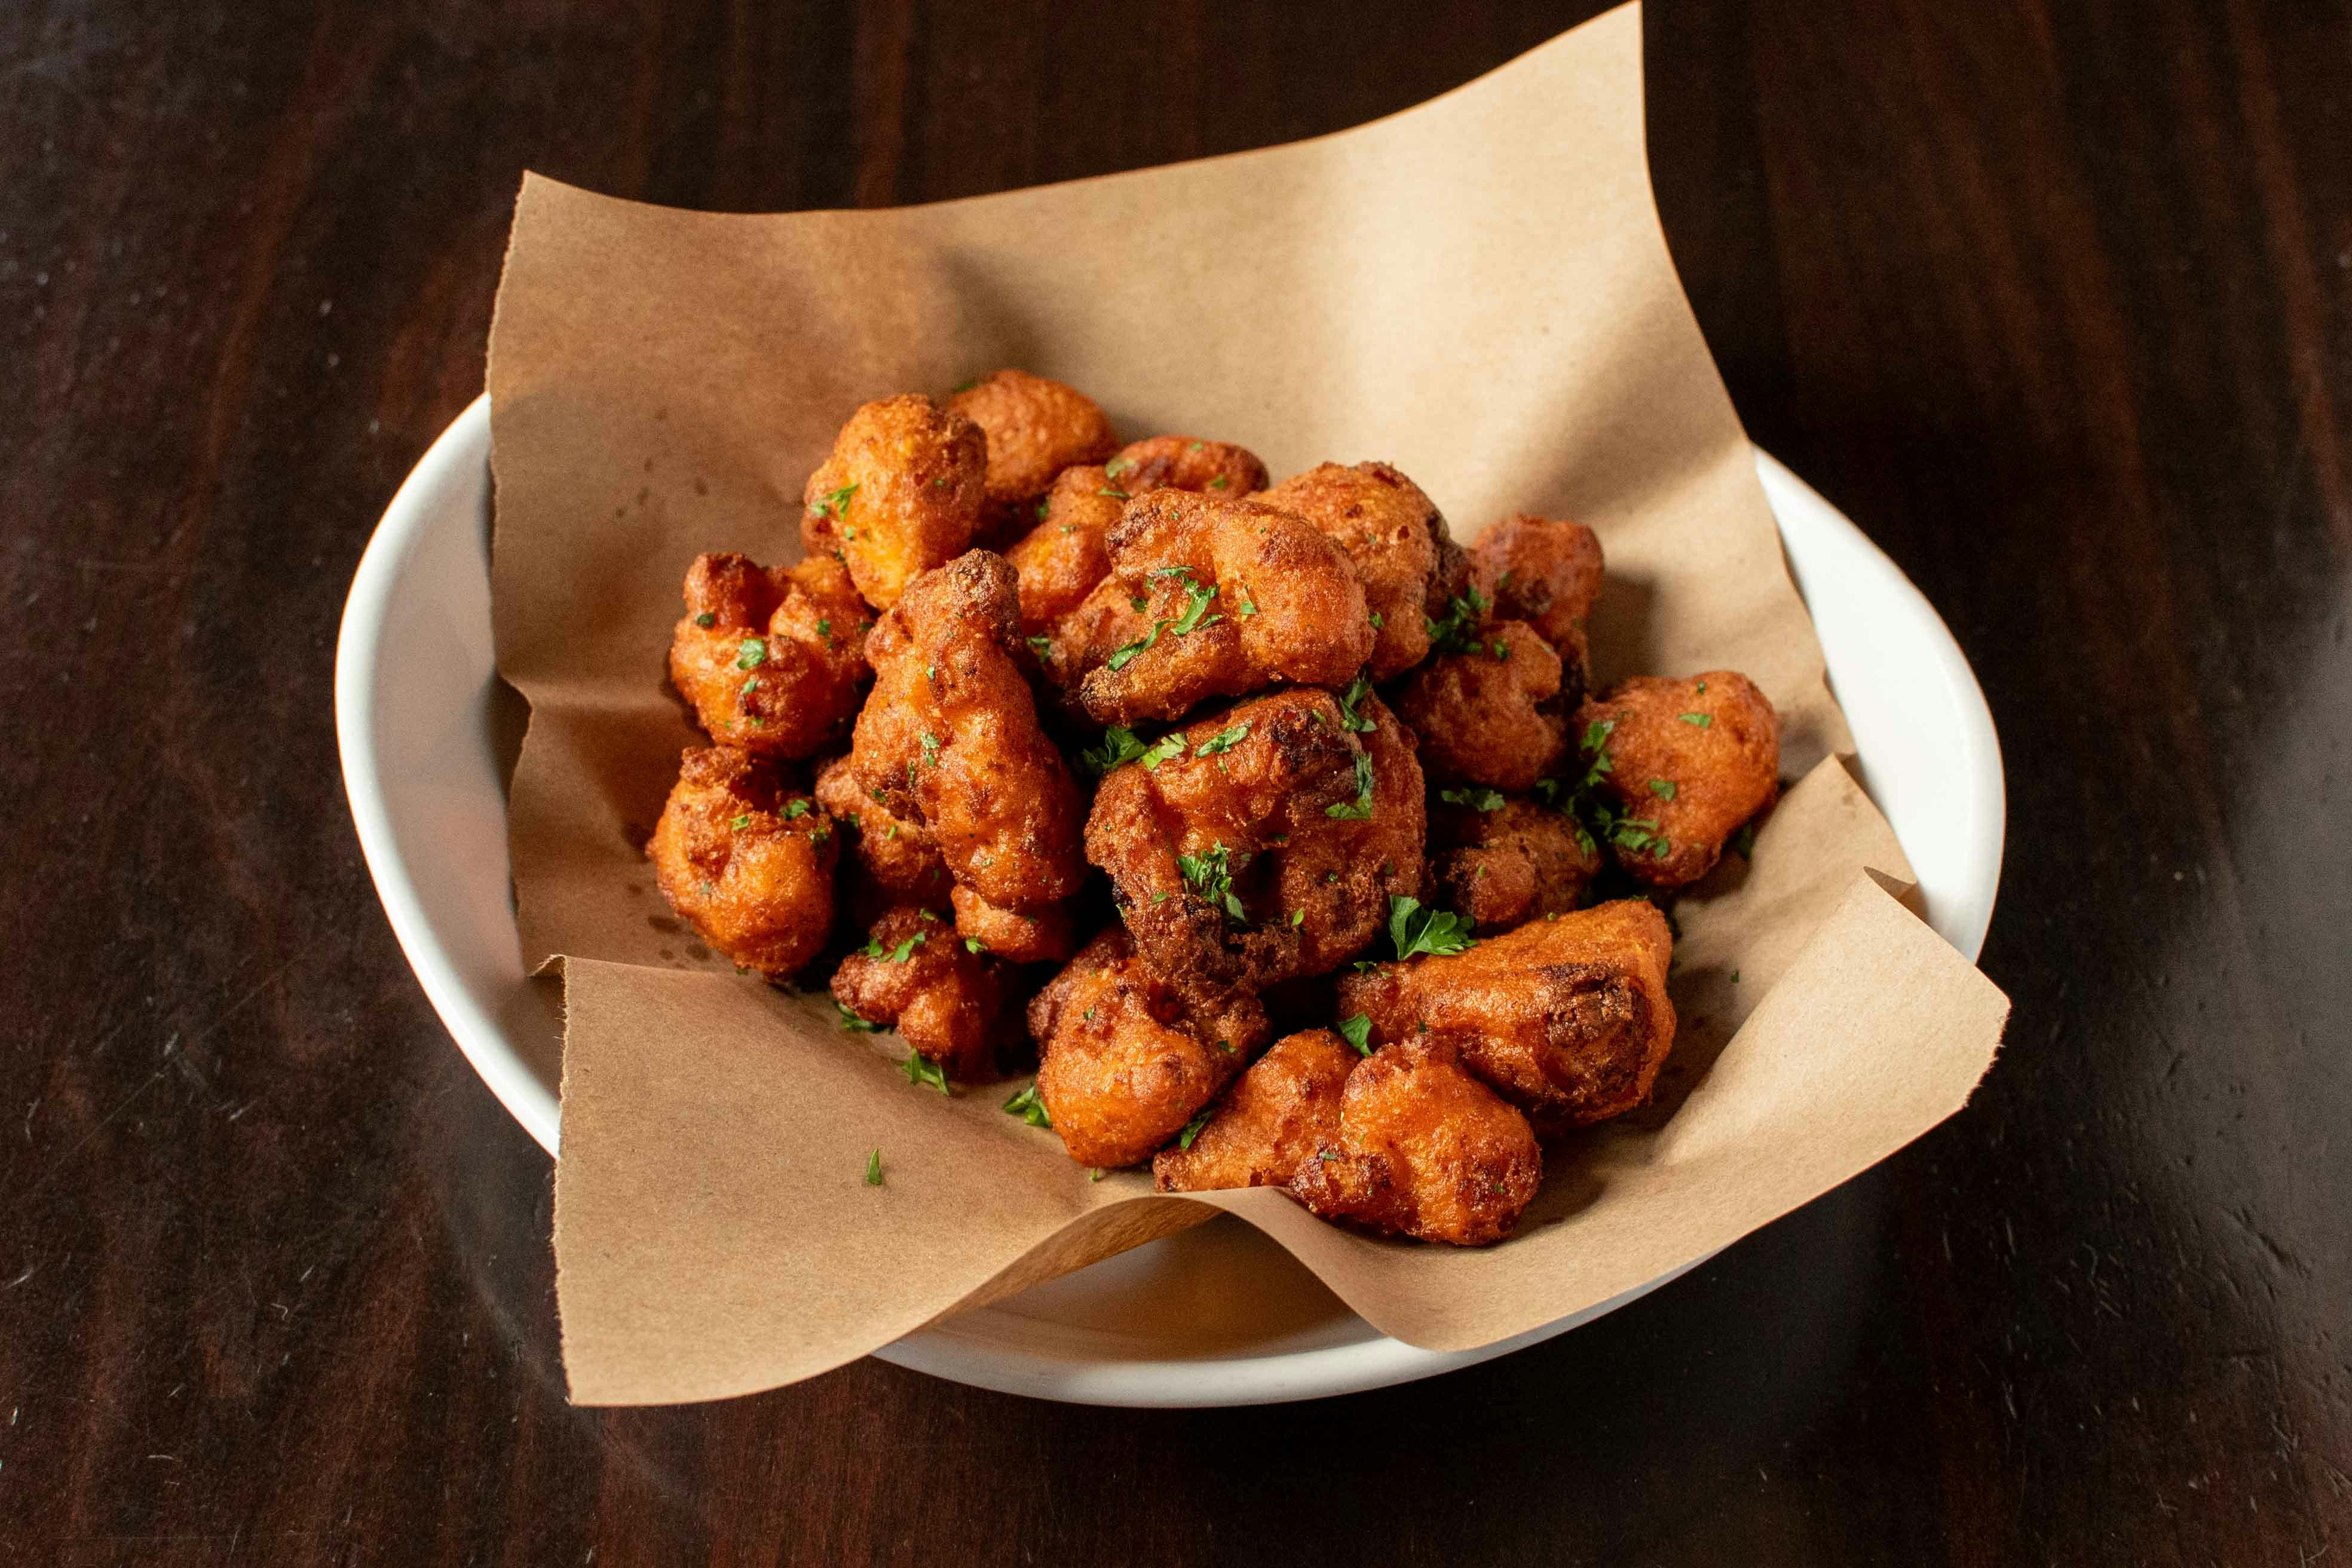 Fried Cauliflower Bites from Midcoast Wings - Glendale Ave in Green Bay, WI